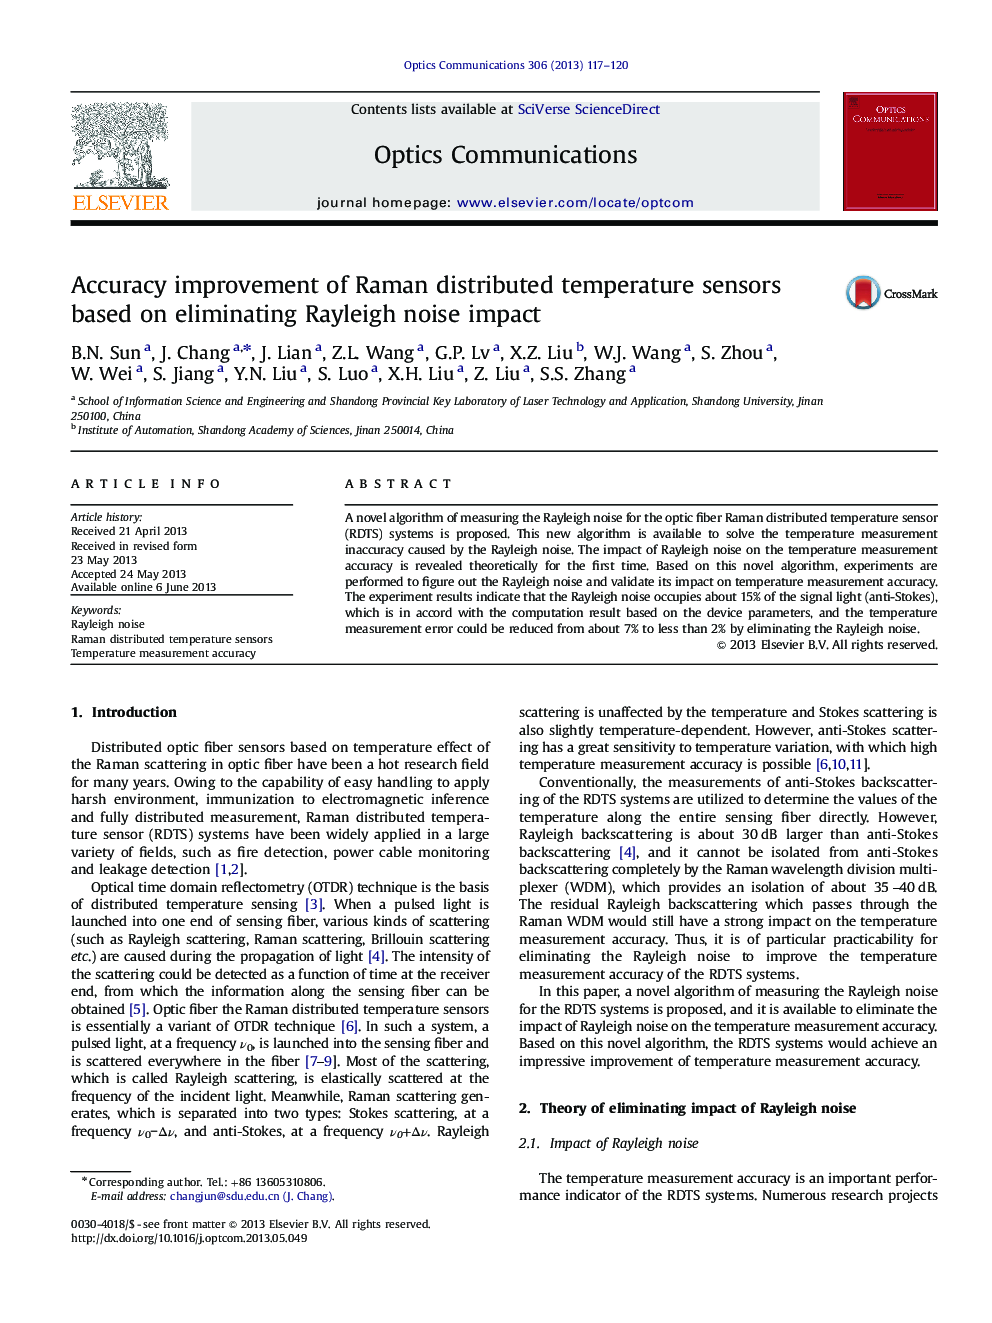 Accuracy improvement of Raman distributed temperature sensors based on eliminating Rayleigh noise impact